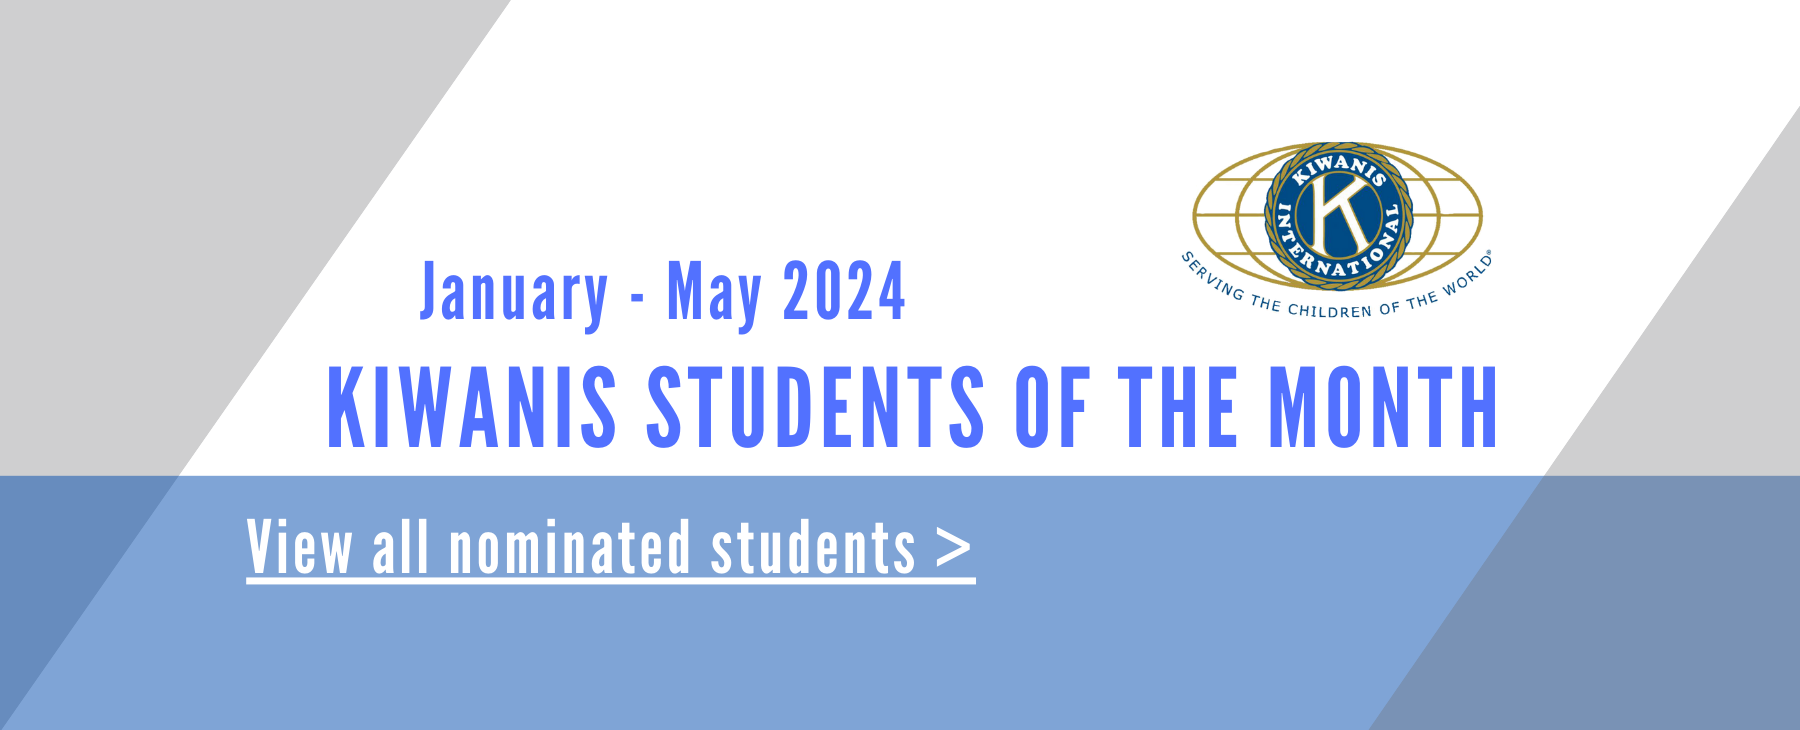 Kiwanis Student of the Month Nominations